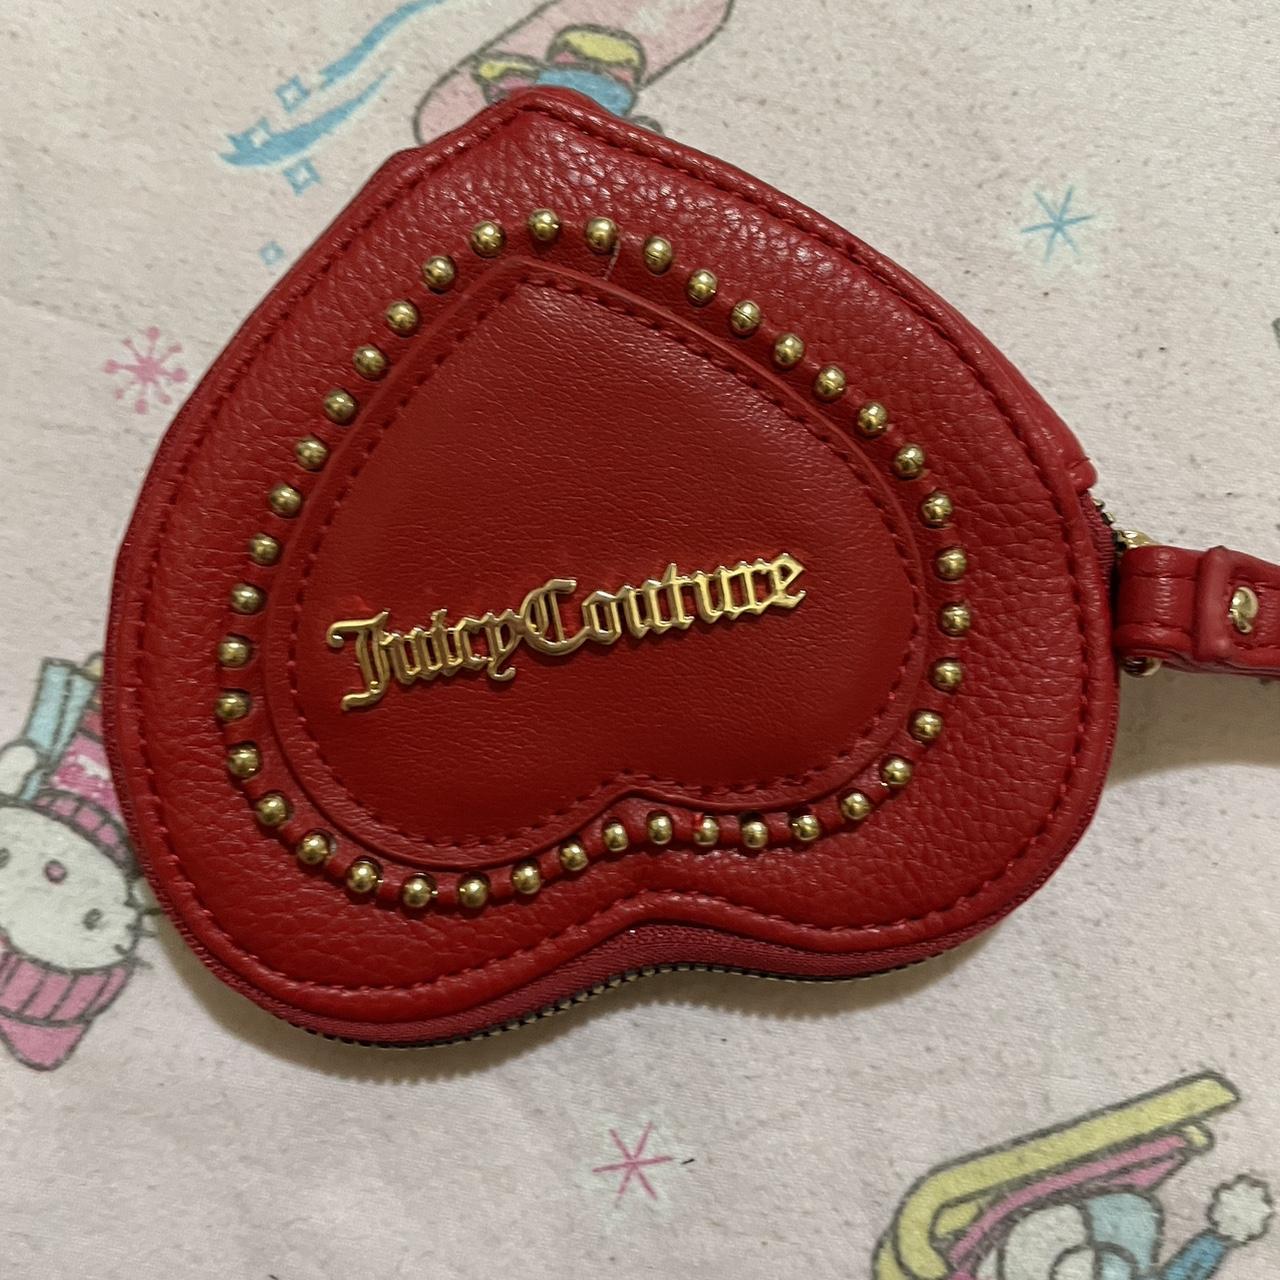 juicy couture red little purse 5x5 in good... - Depop